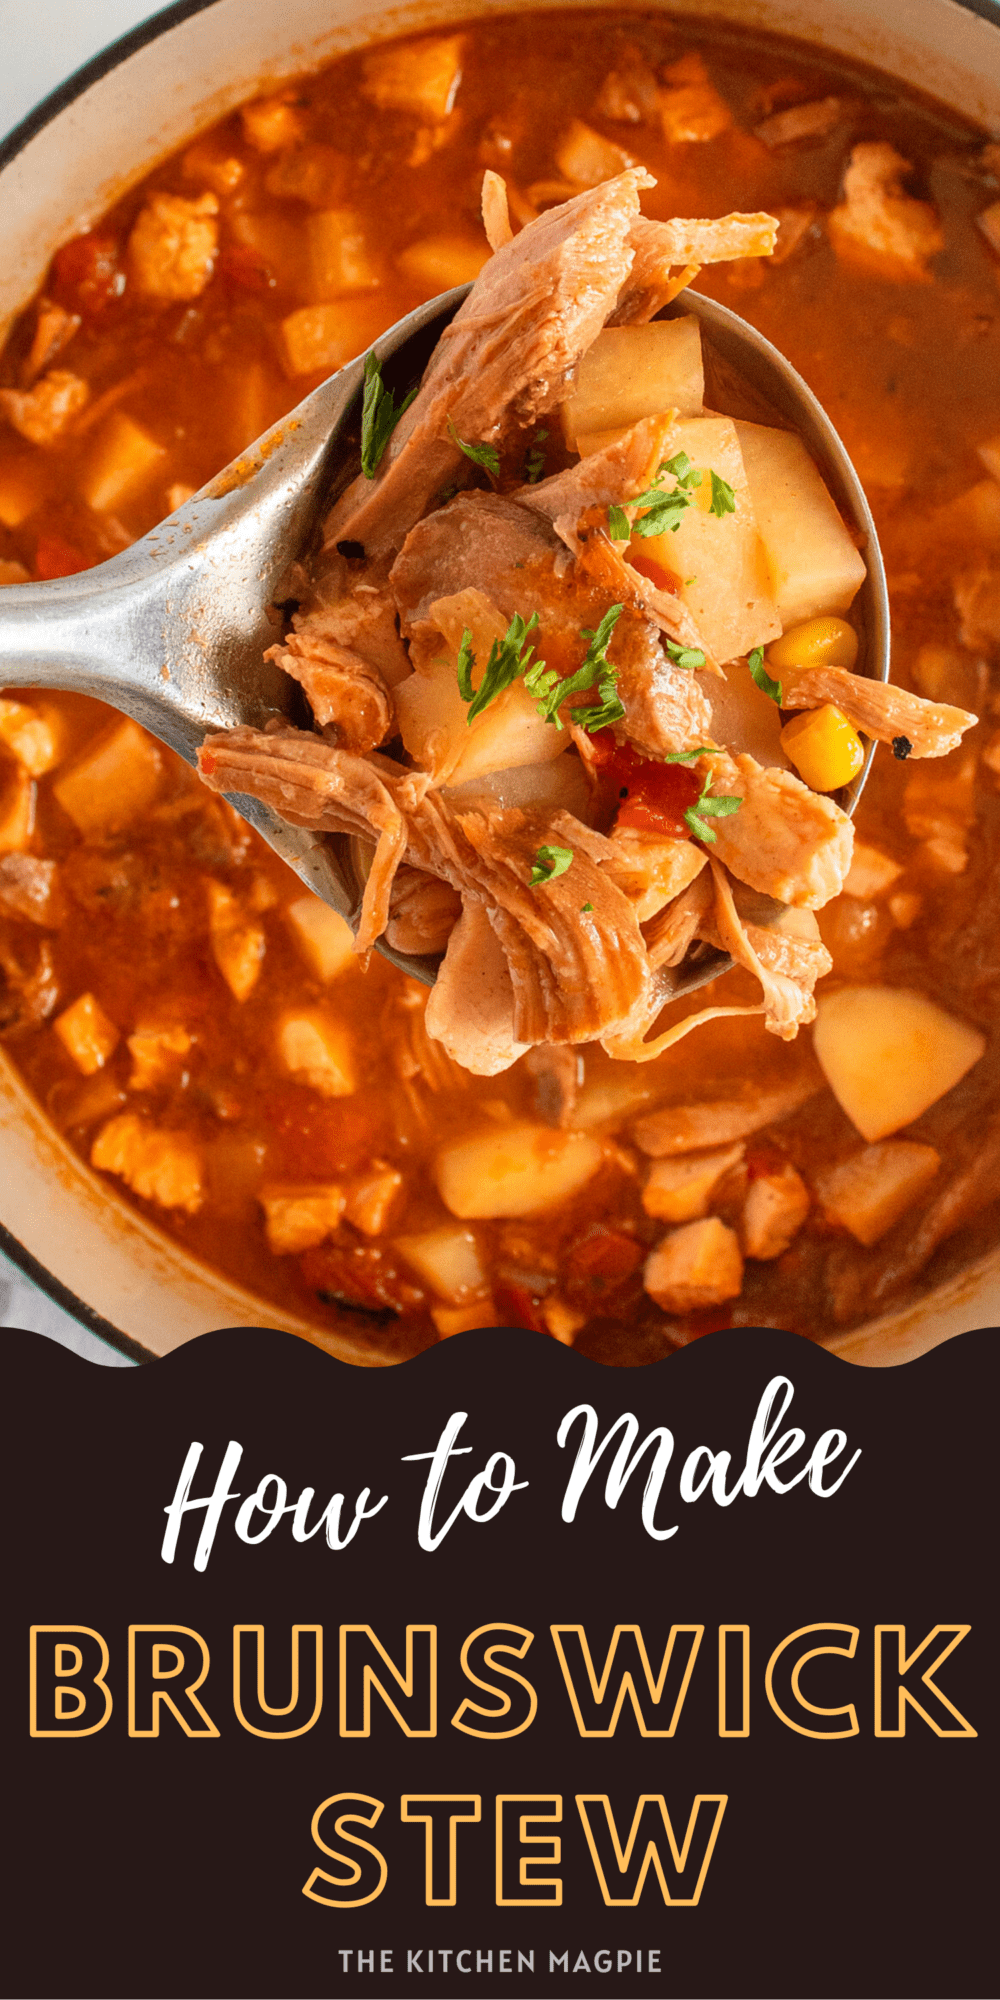 This delicious Brunswick stew is a great way to use up leftover pulled pork and chicken! Use a rotisserie chicken for amazing flavor!